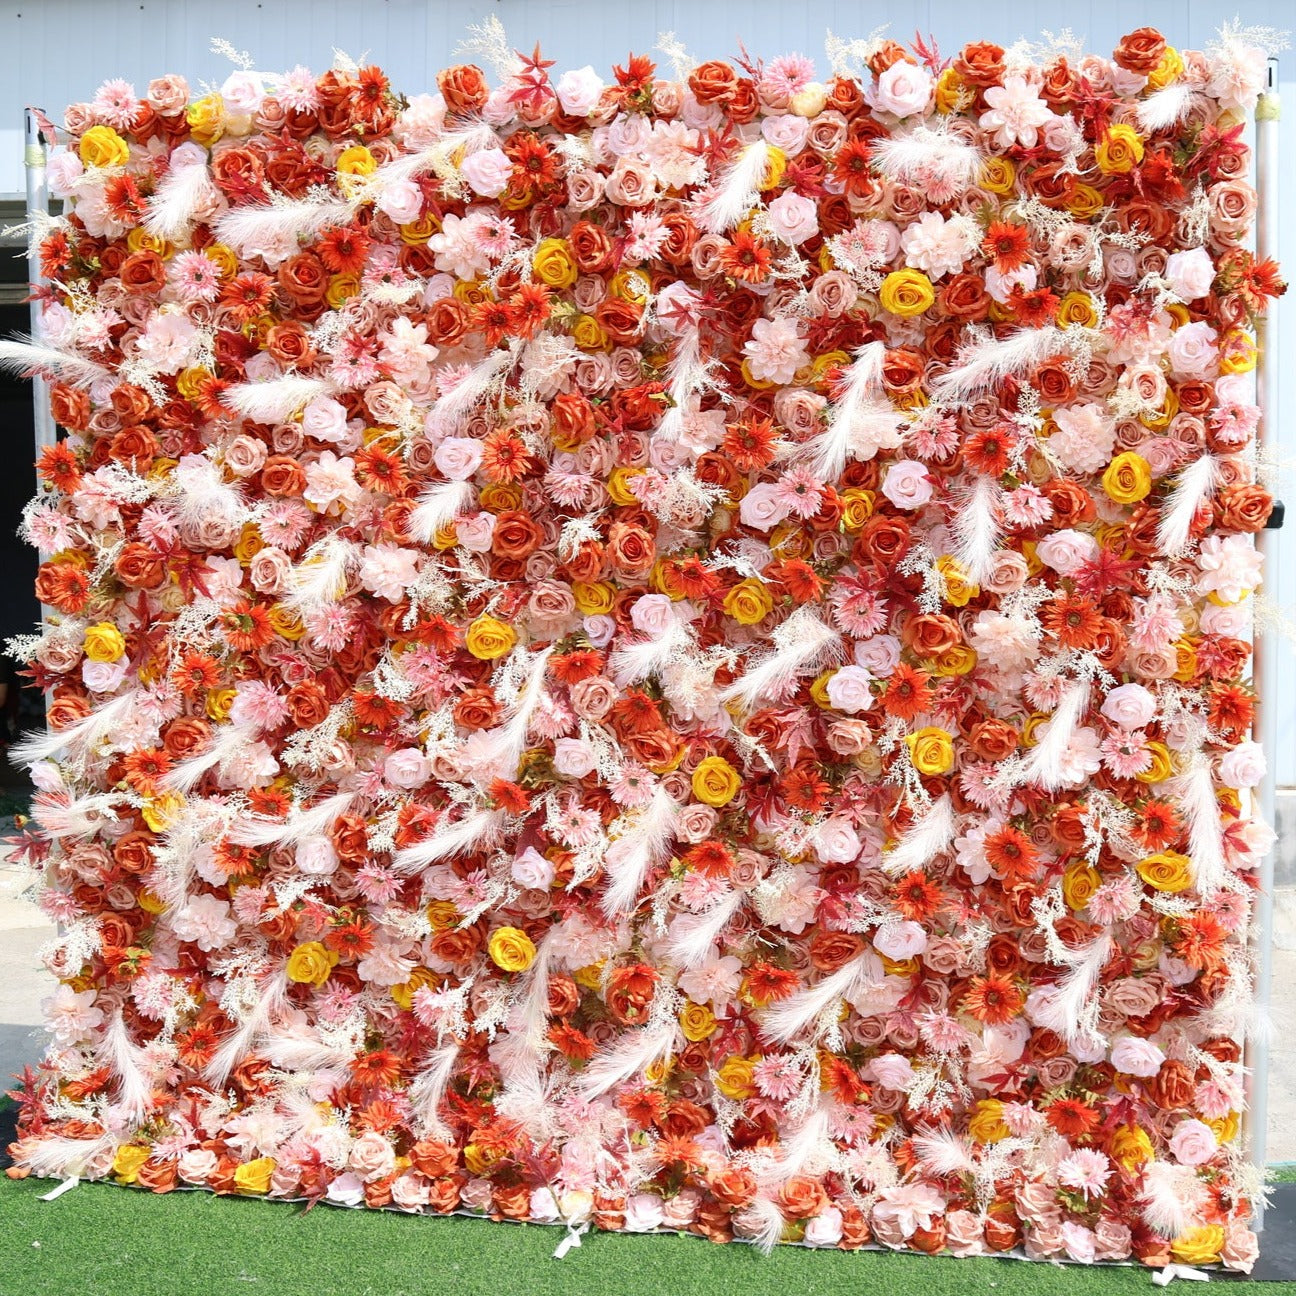 Flower Wall Fall Bright Orange Rose Rolling Up Curtain Floral Backdrop Wedding Party Proposal Decor